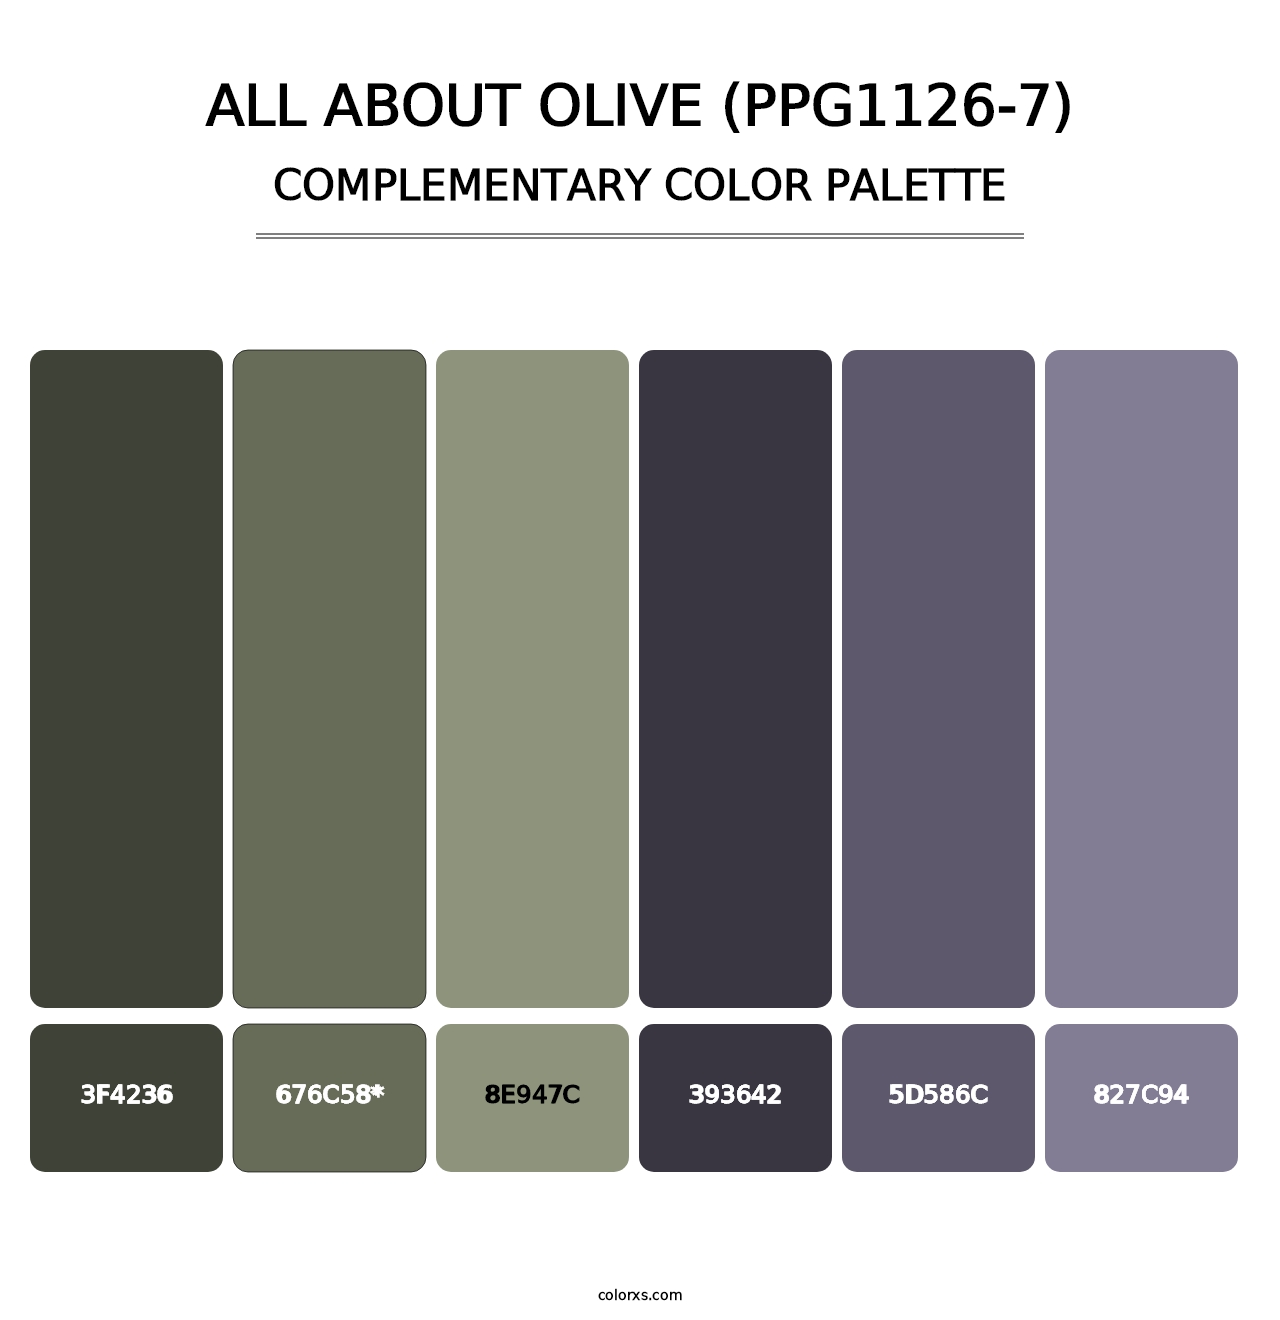 All About Olive (PPG1126-7) - Complementary Color Palette